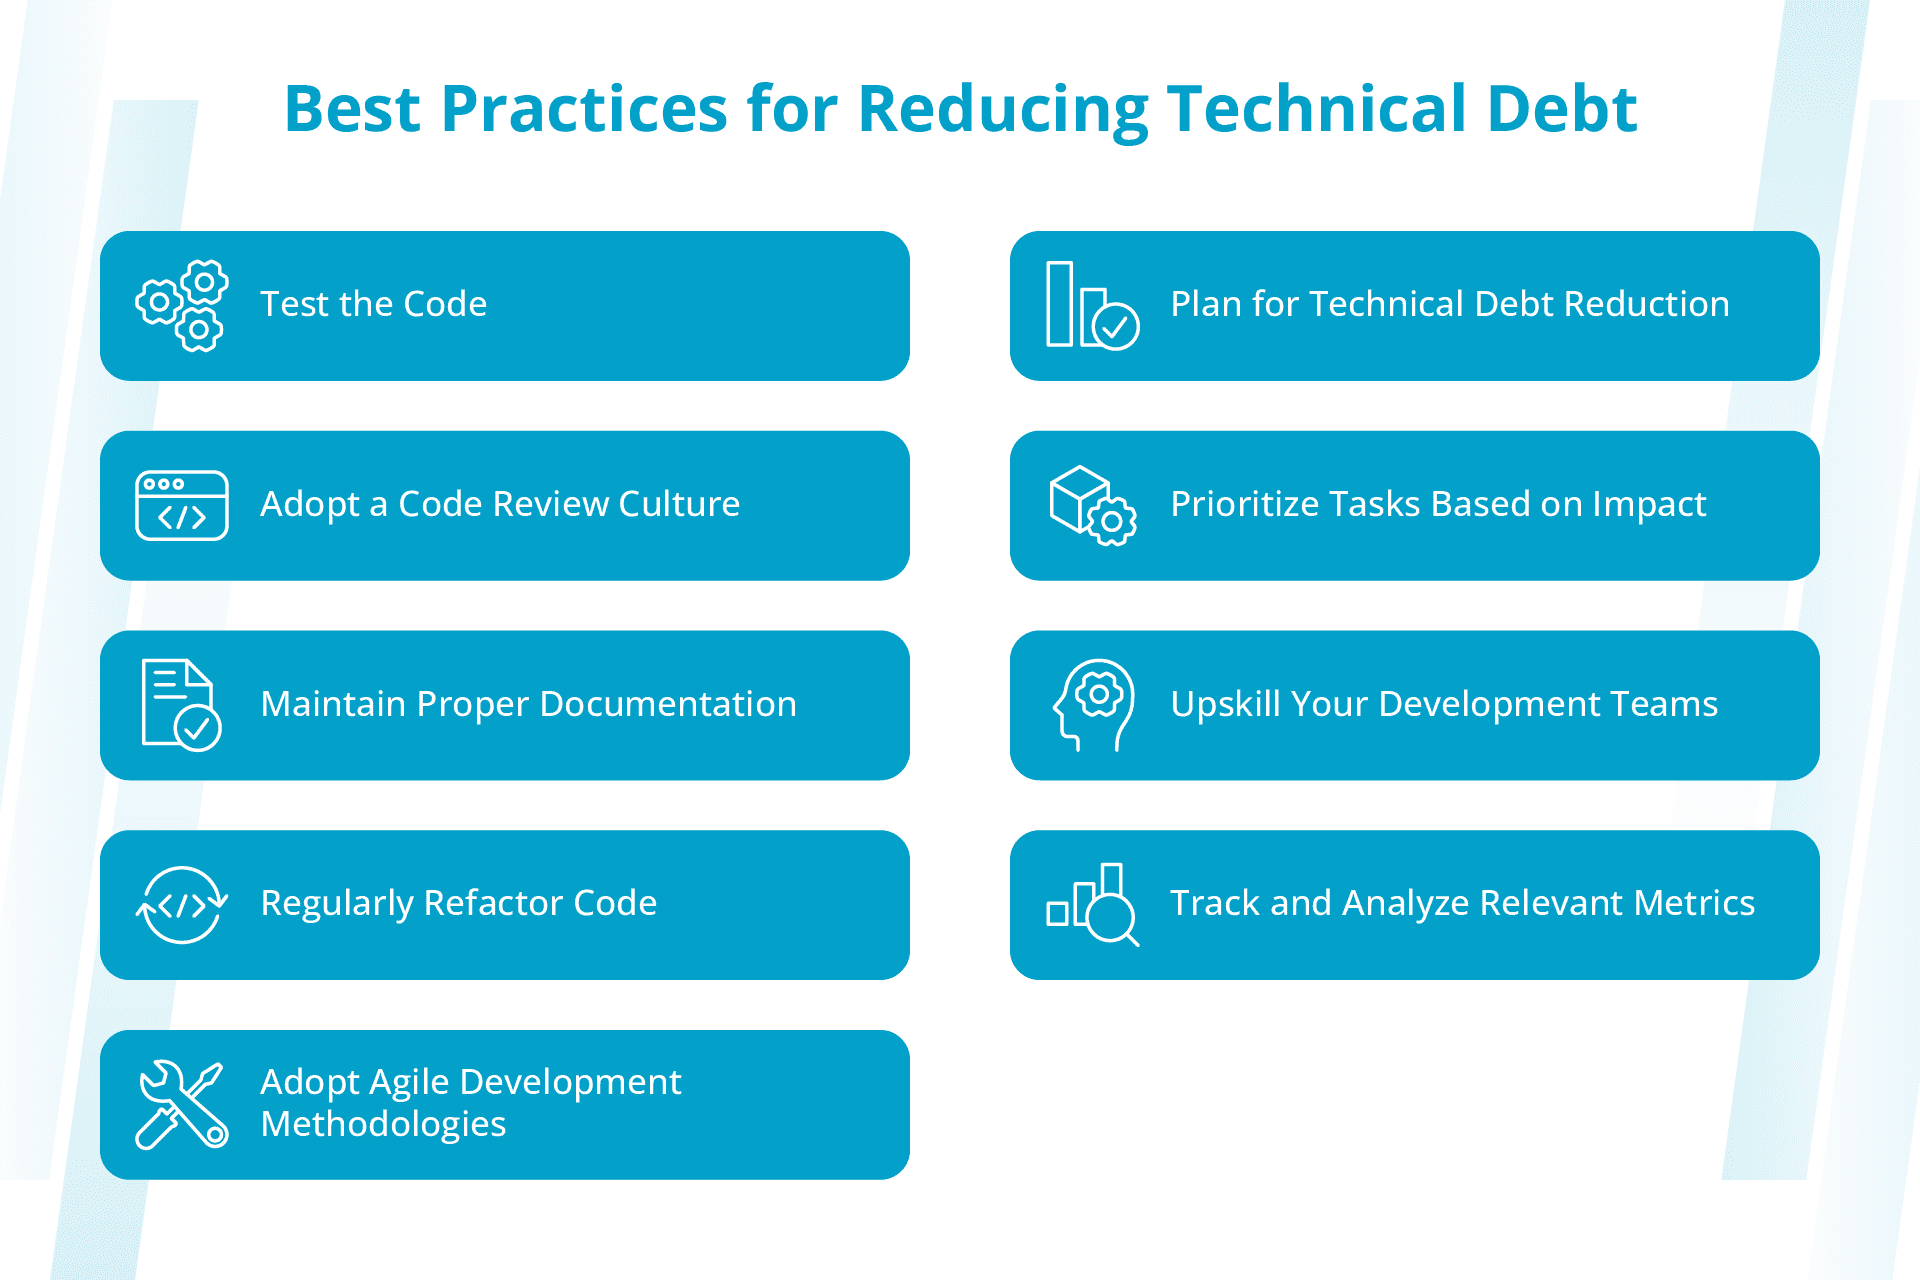 Best practices for reducing technical debt.